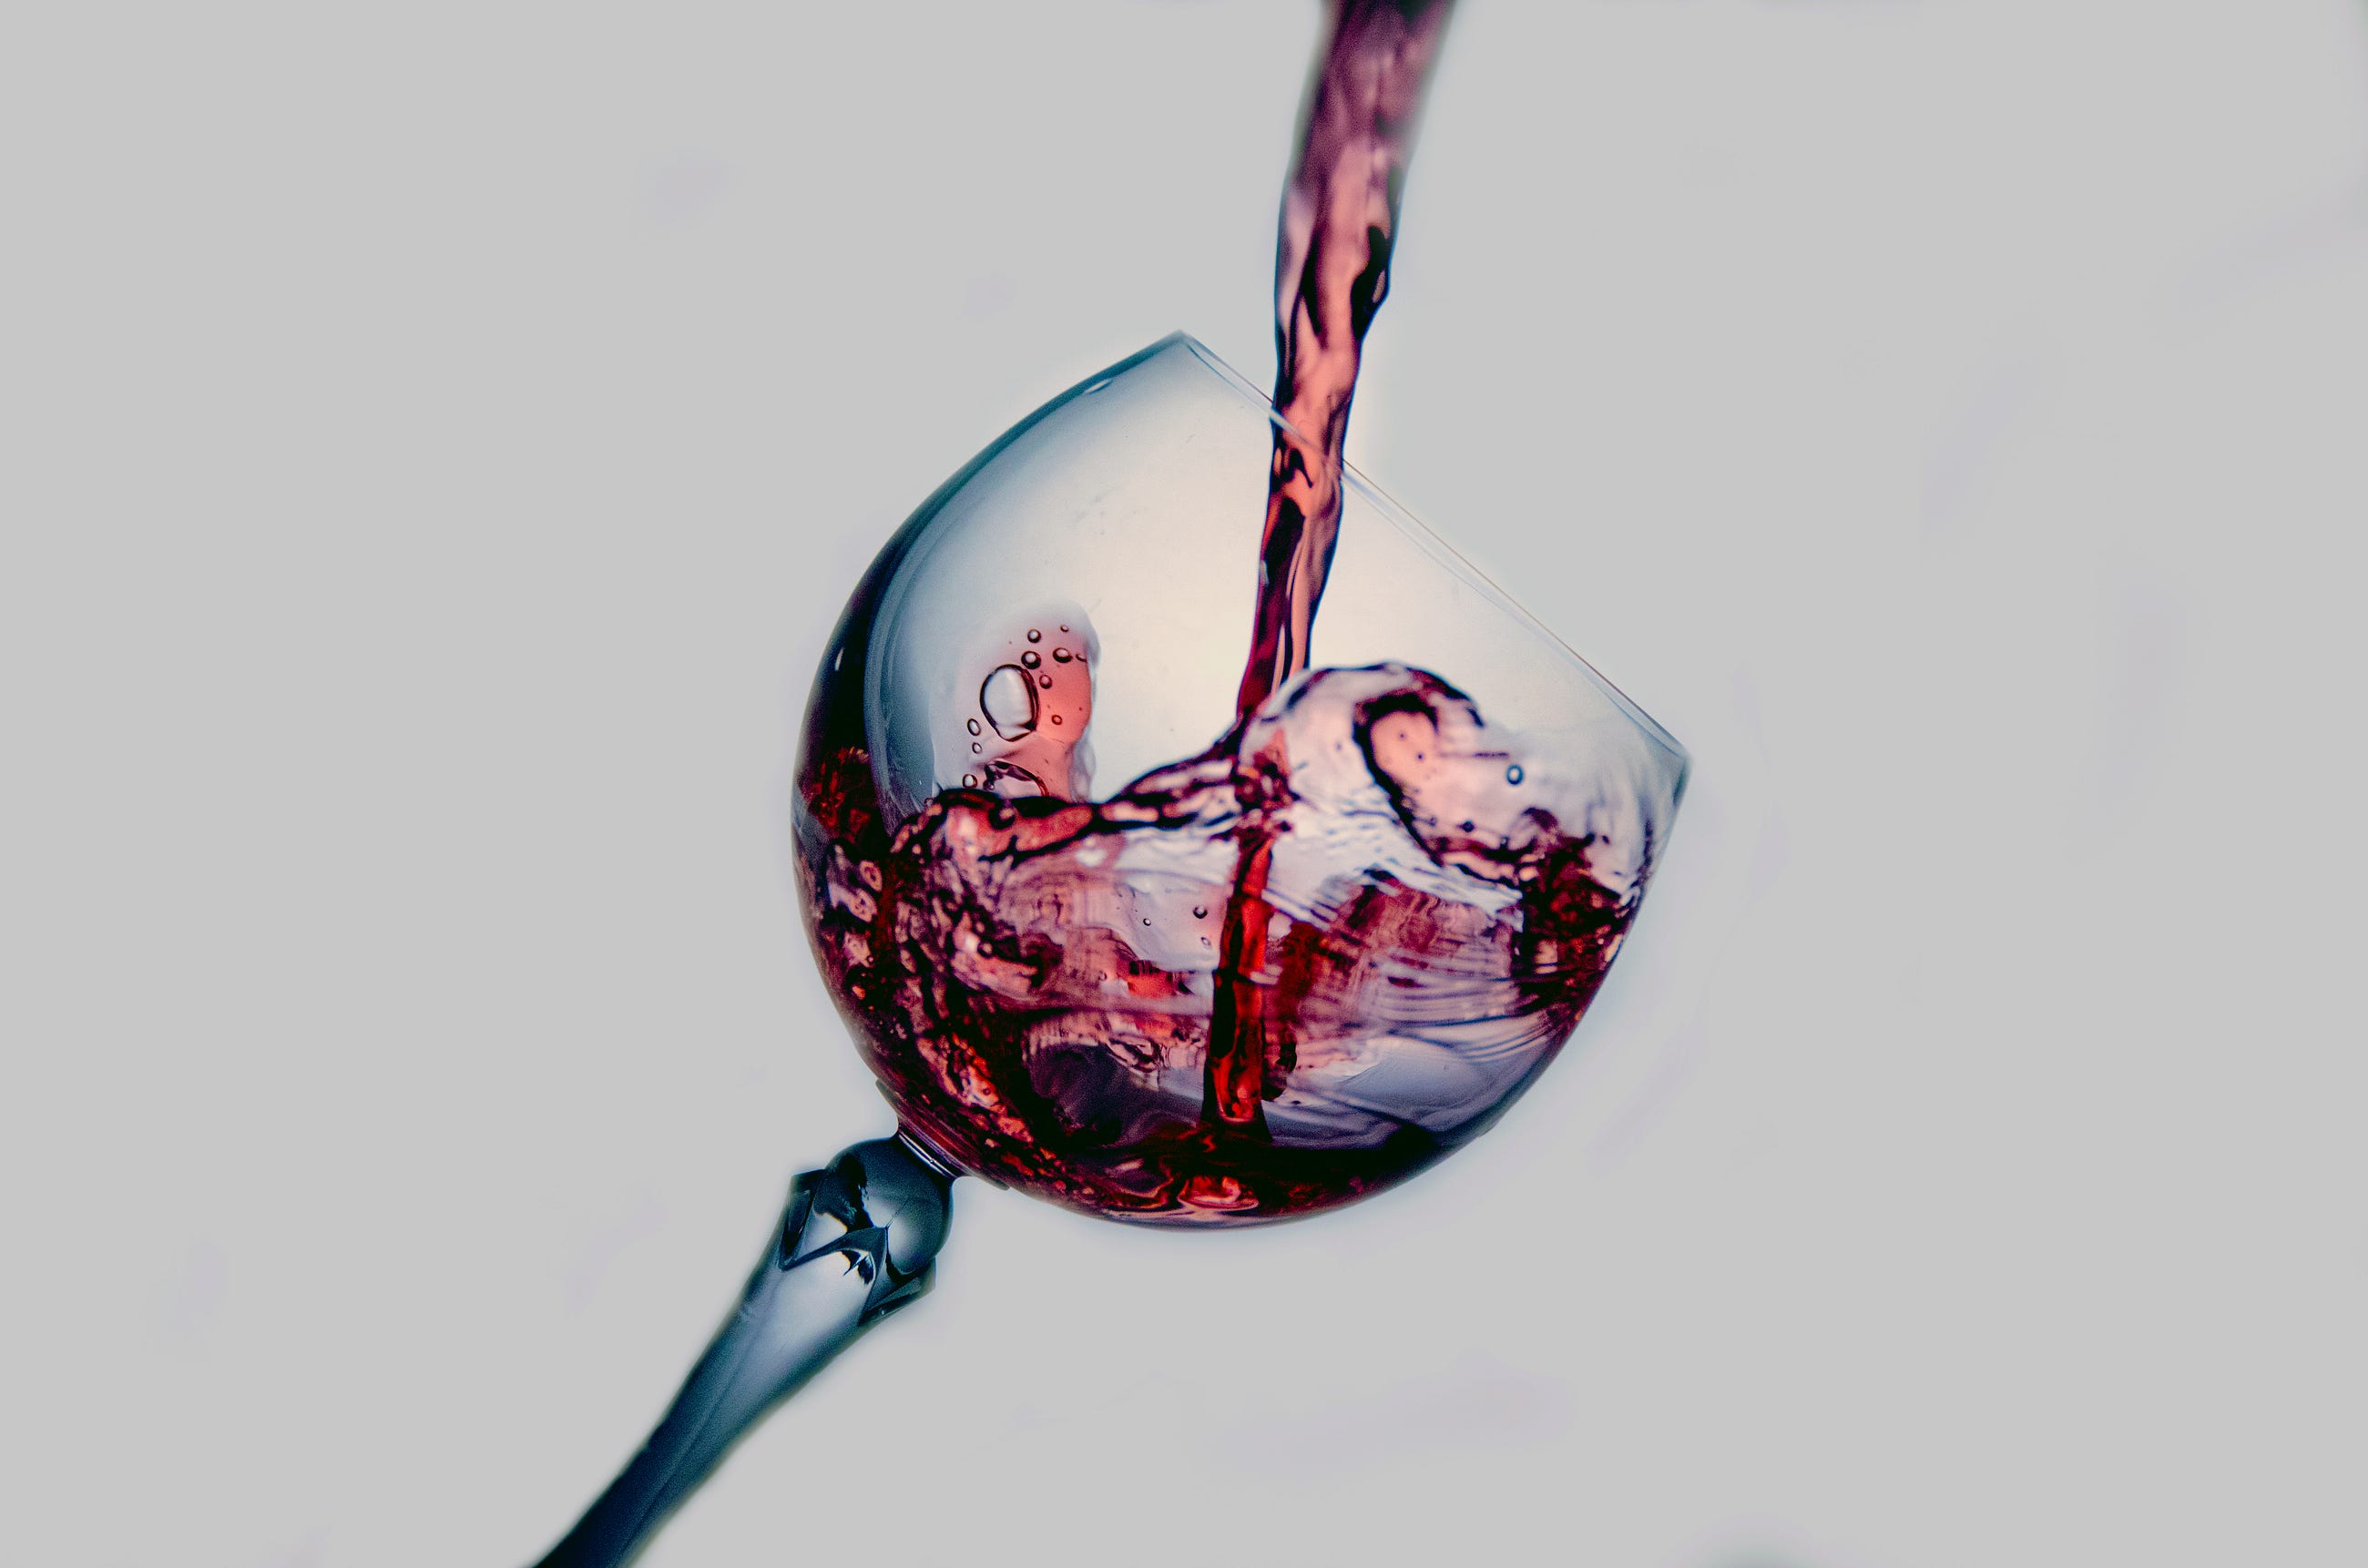 Wine Classifier Using Supervised Learning with 98% Accuracy